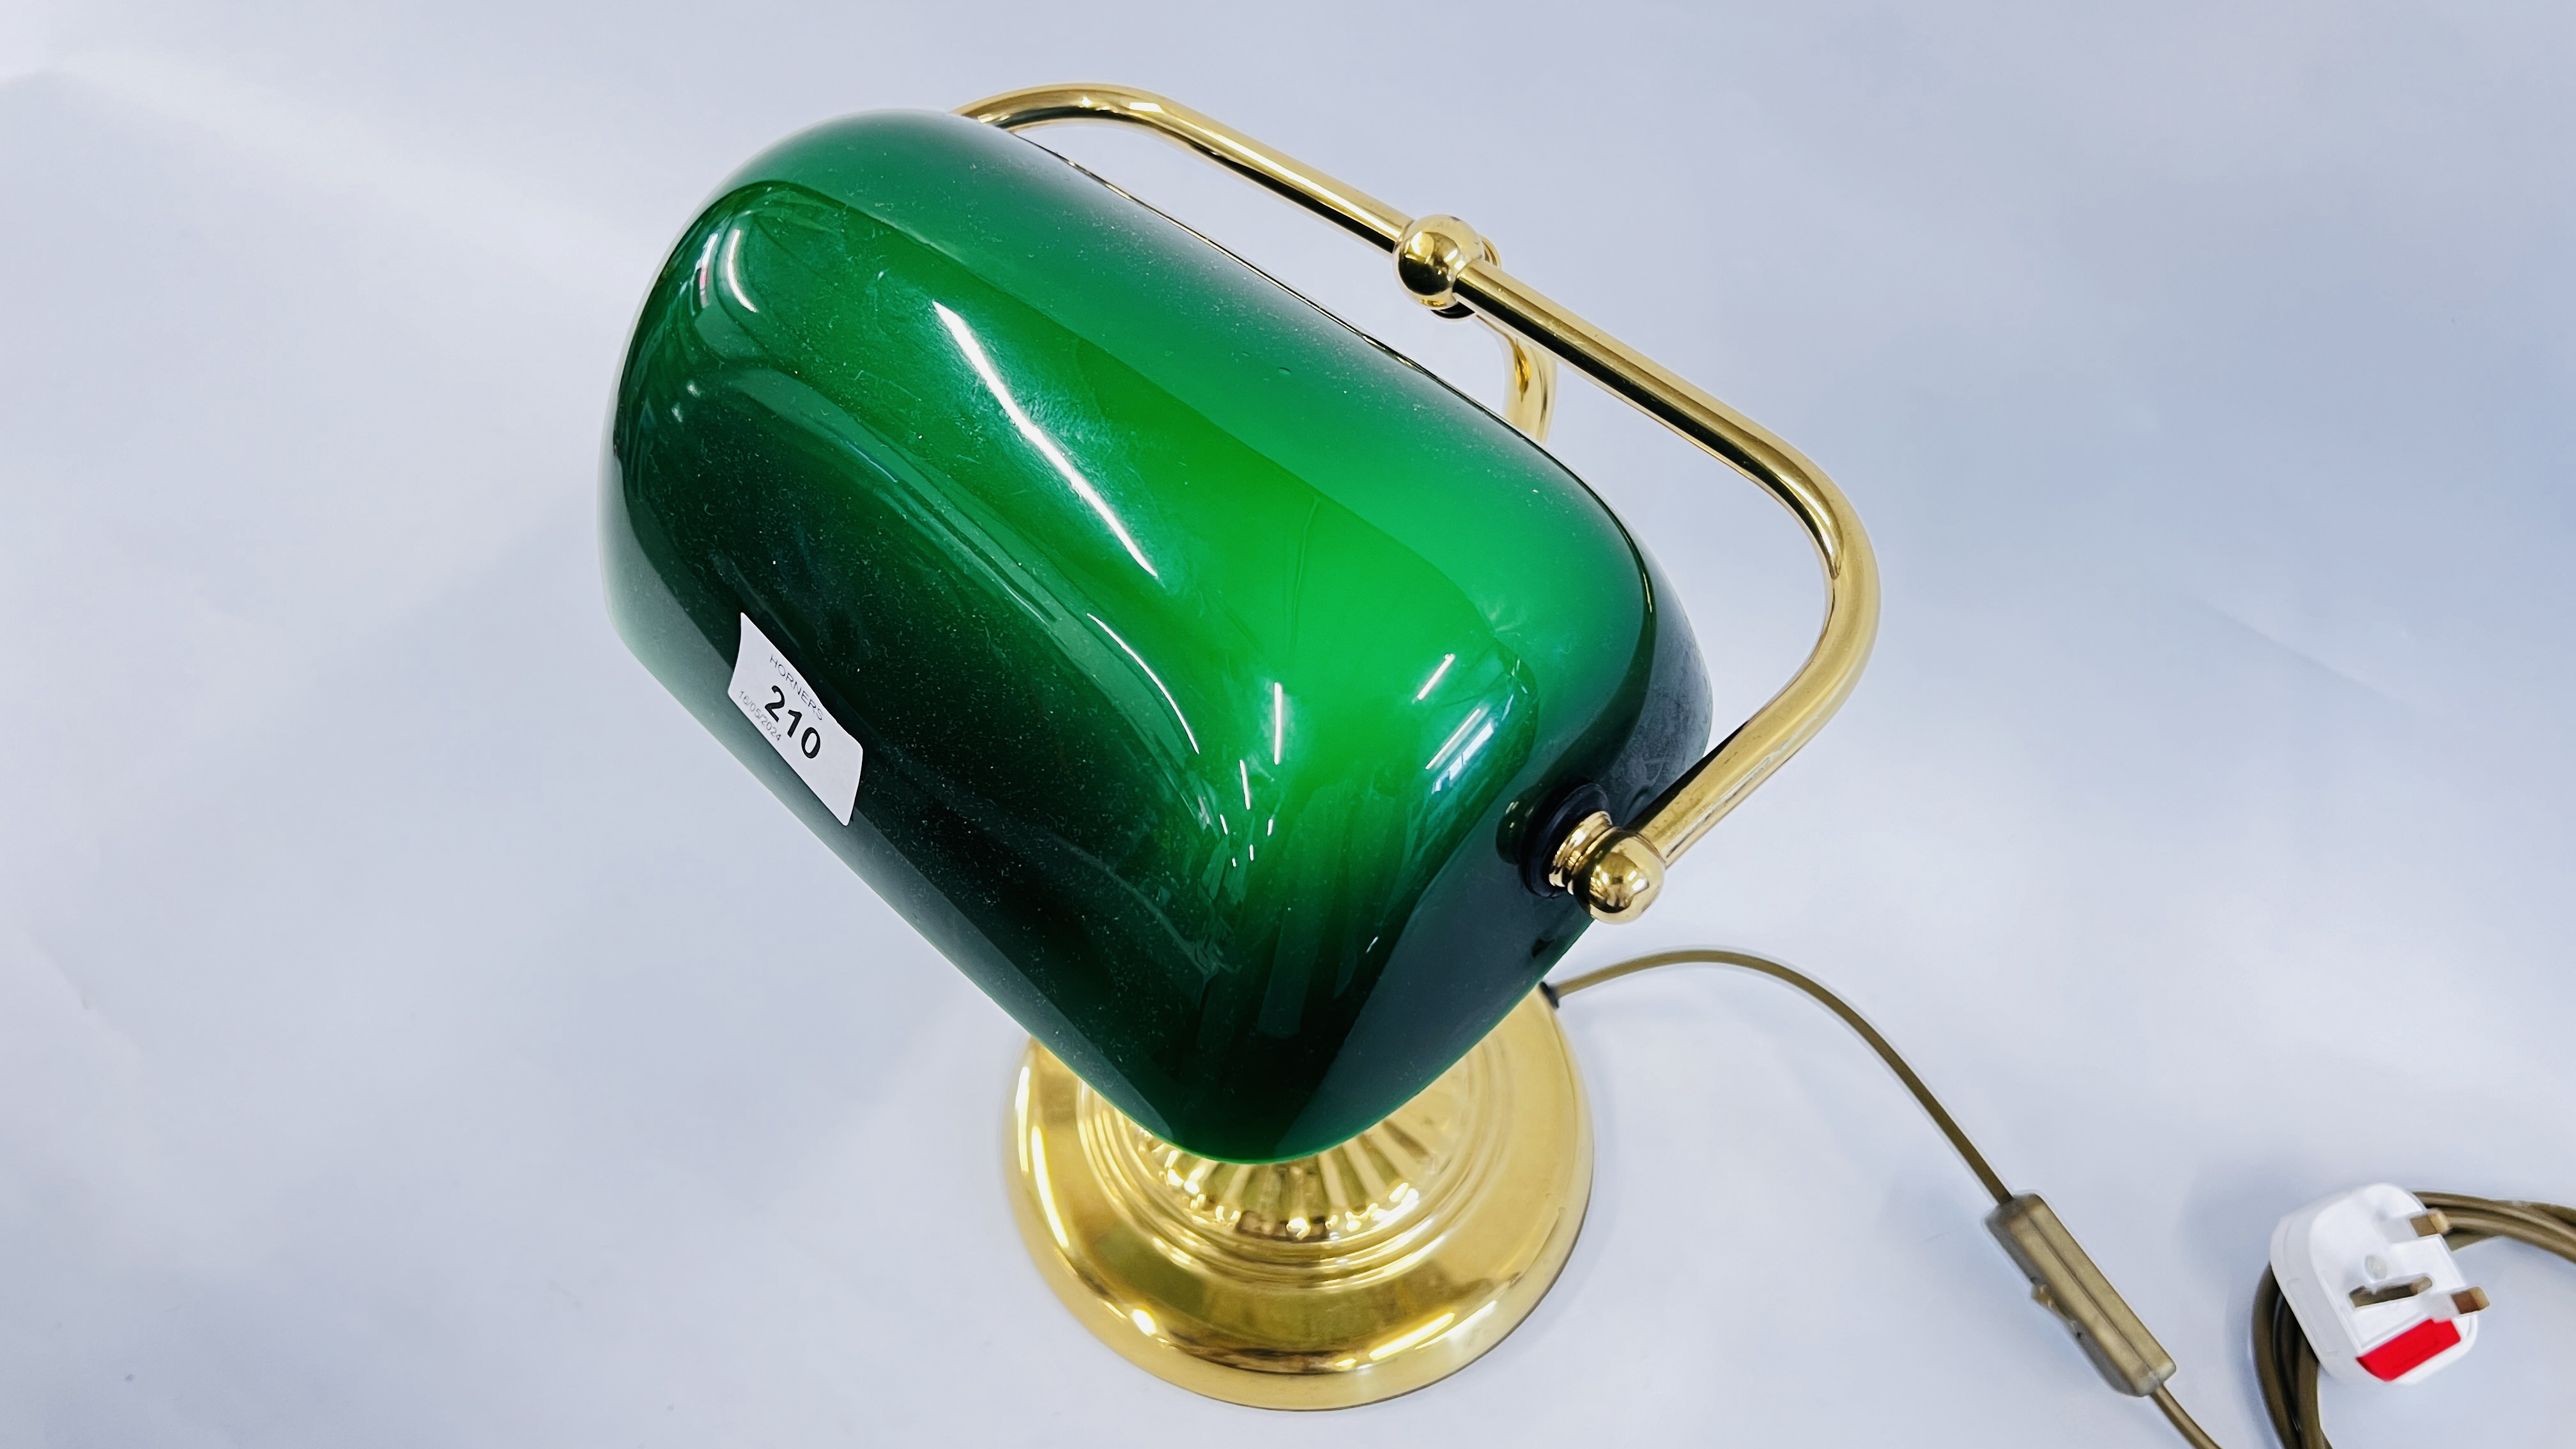 A REPRODUCTION BRASSED BANKERS DESK LAMP WITH GREEN GLASS SHADE - SOLD AS SEEN. - Image 3 of 5